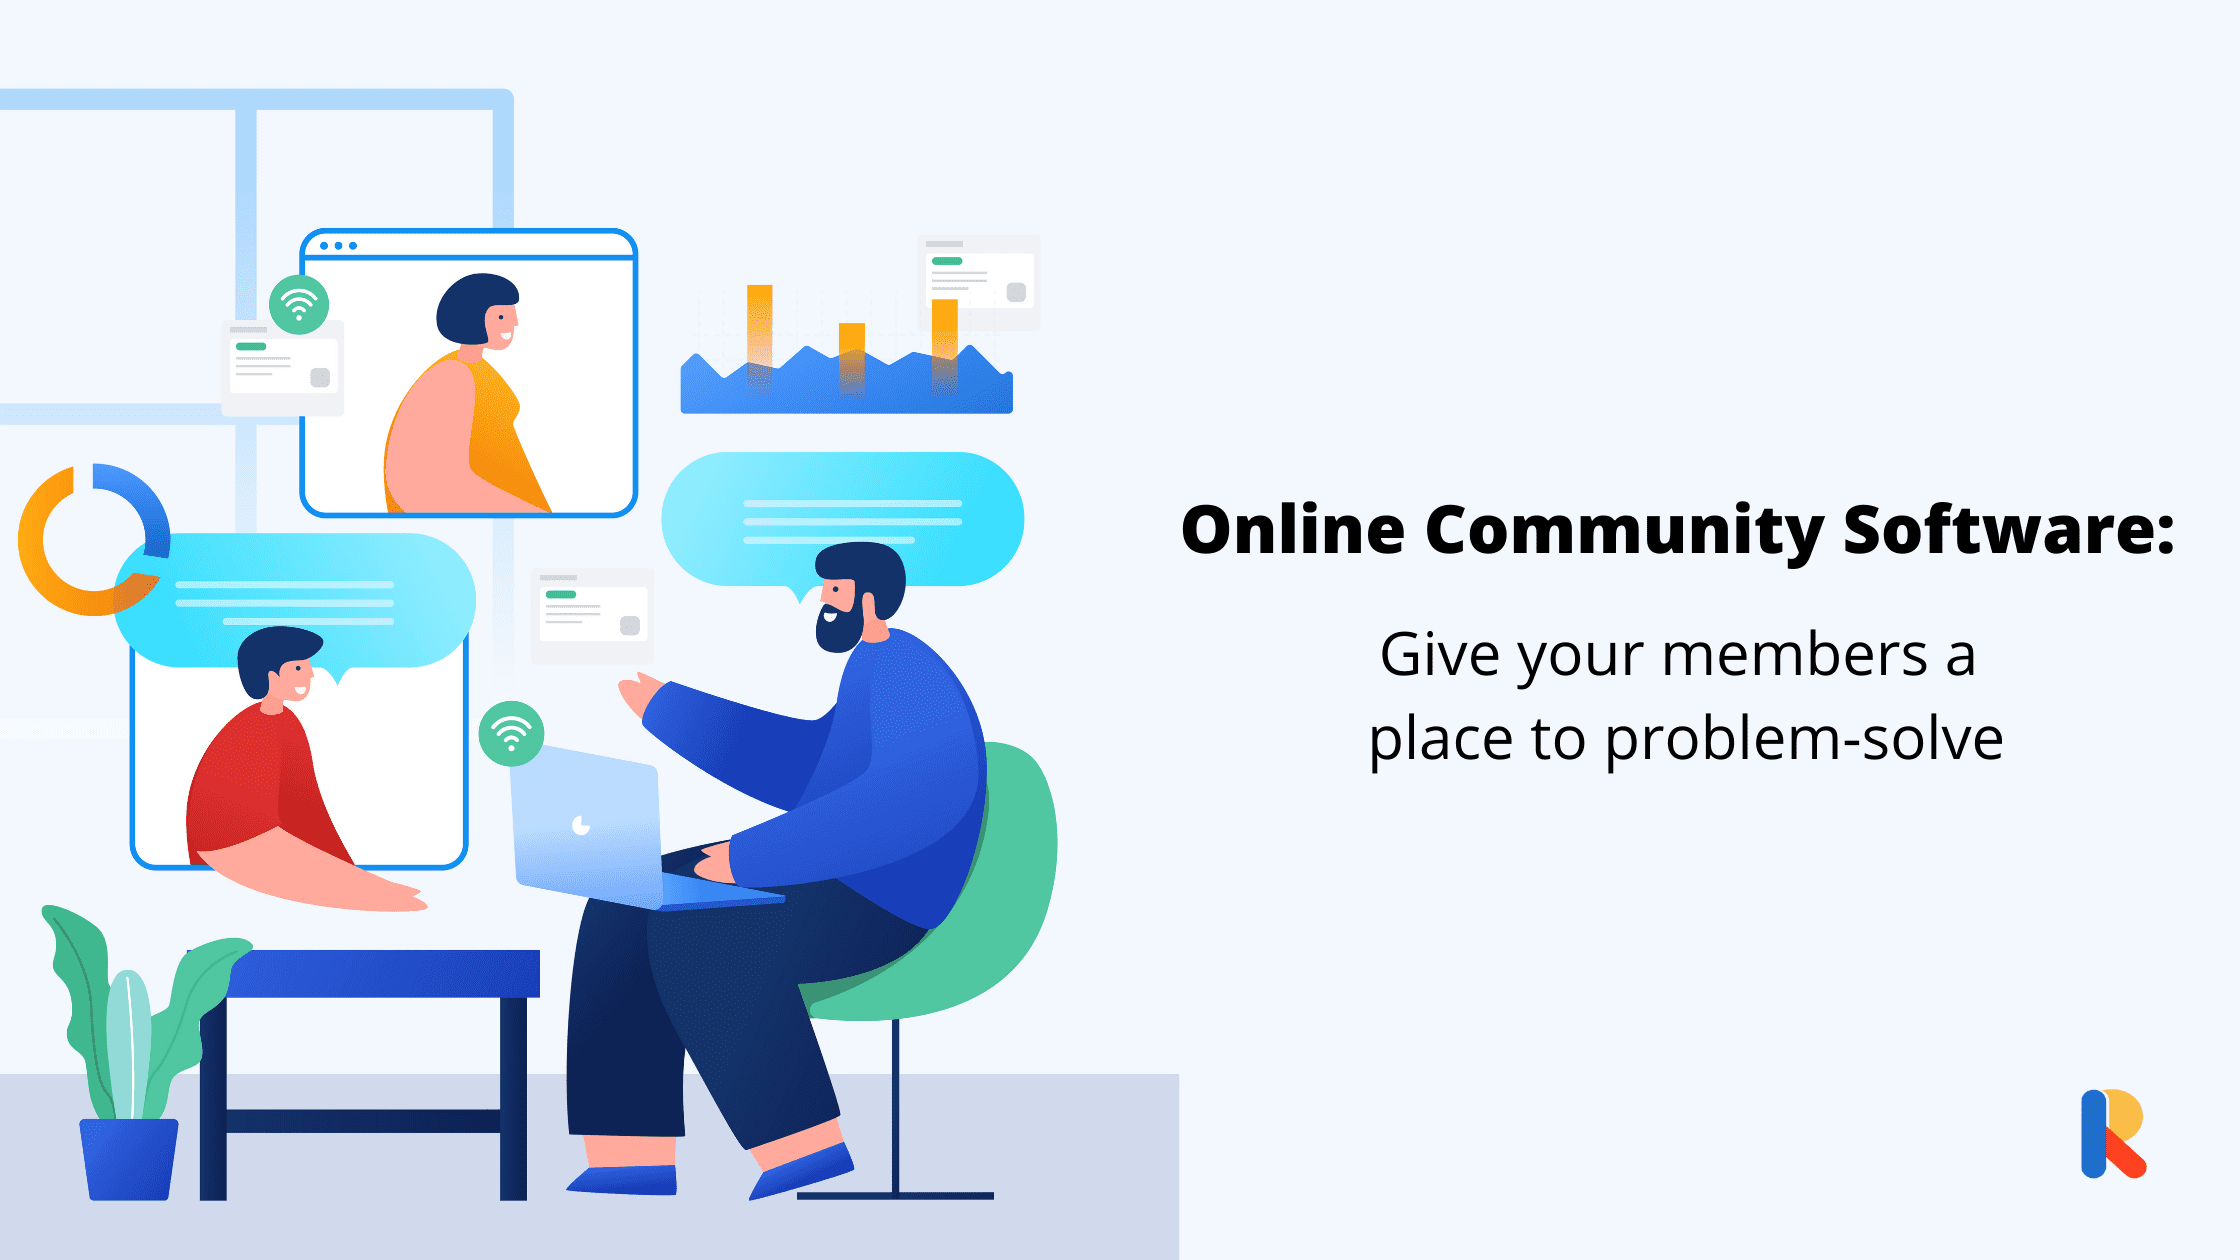 Online Community Software: Give Your Members a Place to Problem-Solve